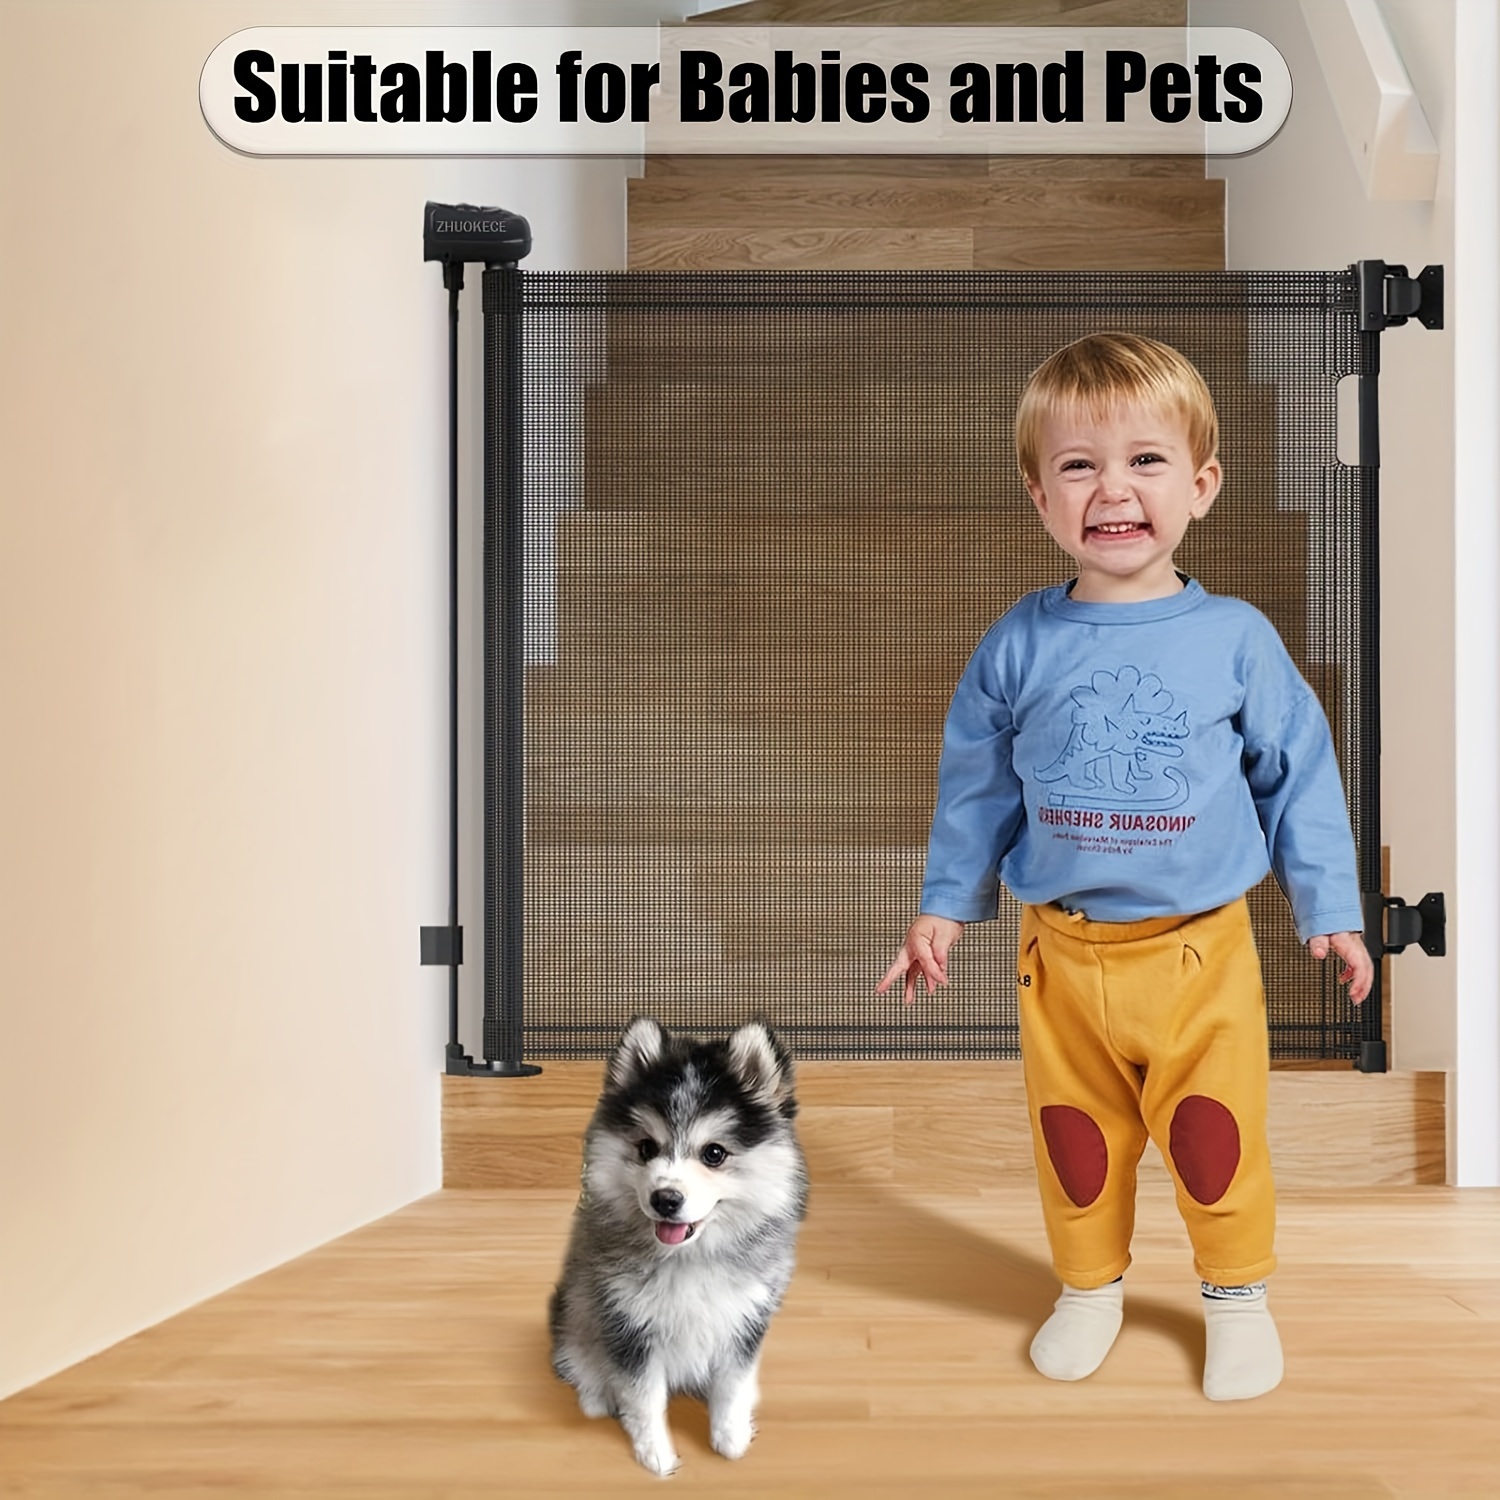 

Retractable Baby Gate, 33" Tall, Extends Up To 55" Wide, Mesh Child Safety Baby Gates Dog Gate For Stairs, Doorways, Hallways, Indoor, Outdoor